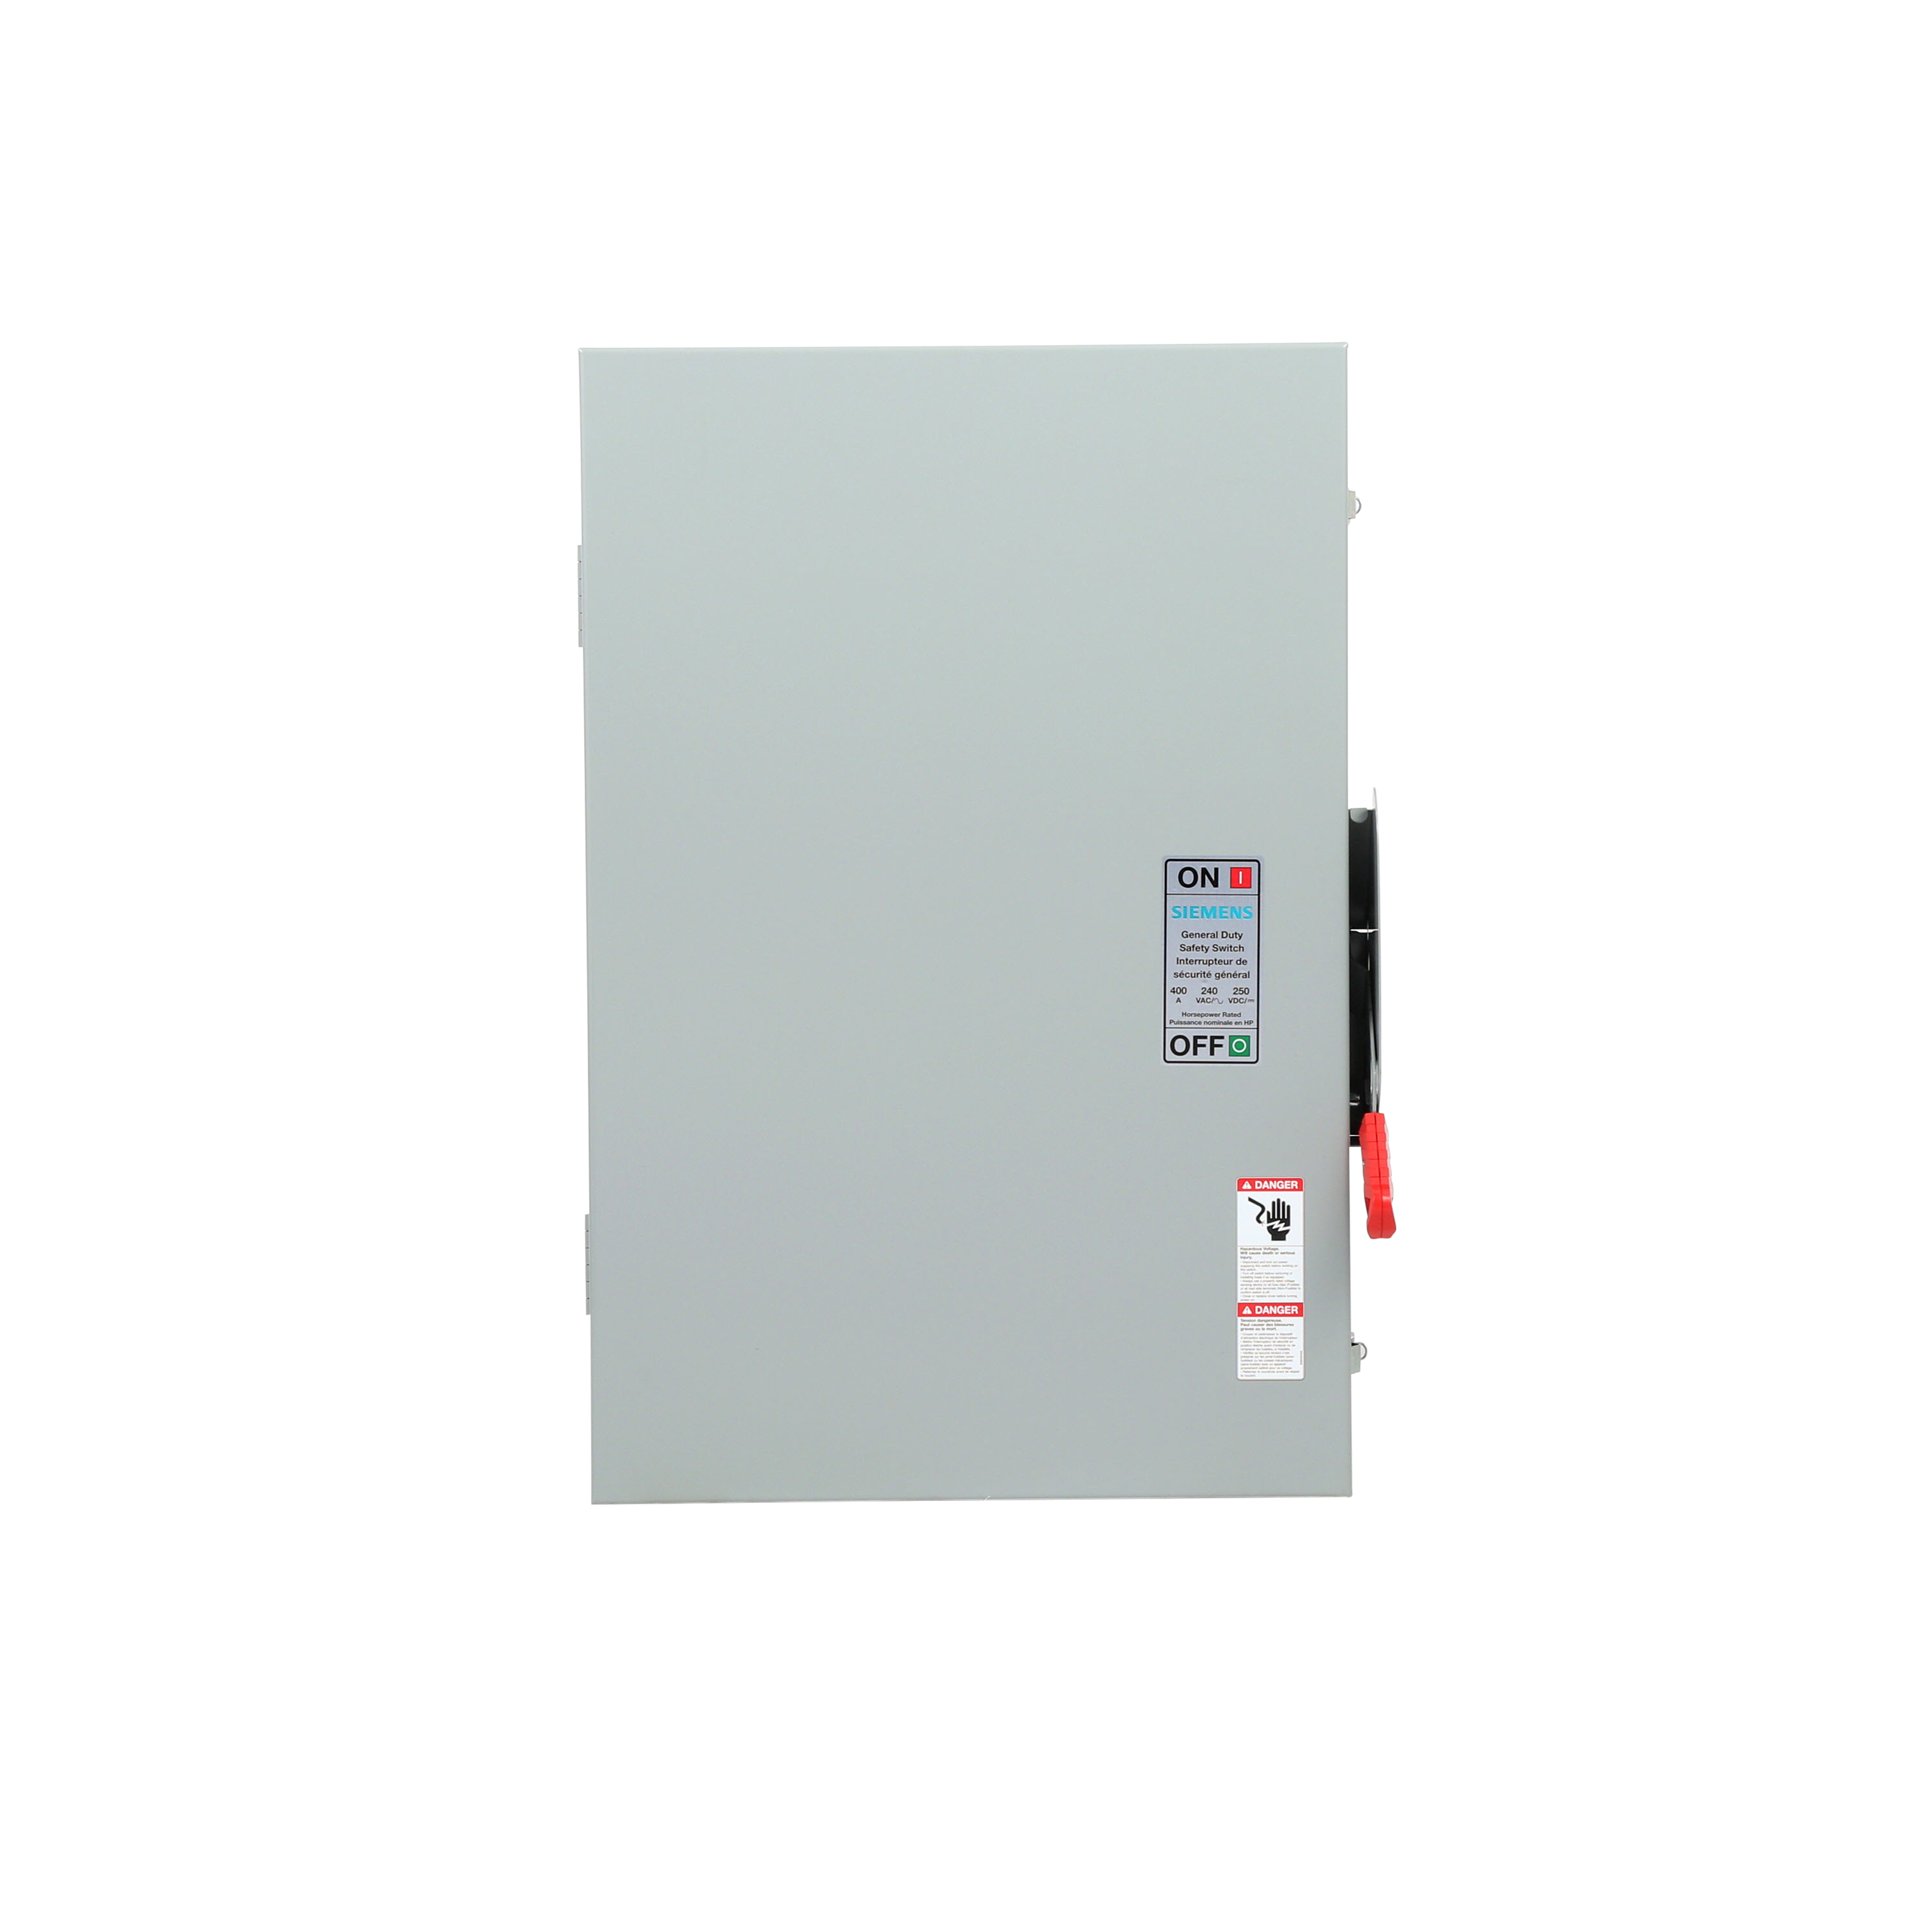 Siemens Low Voltage Circuit Protection General Duty Safety Switch. 2-Pole or 3-Pole Non-Fused in a type 1 enclosure (indoor). Rated 240VAC (400A). Horse power 1-PH 2-W (15), 3-PH 3-W (125), 250VDC (50). Special features service entrance labeled suitable for 3-PH motor loads.